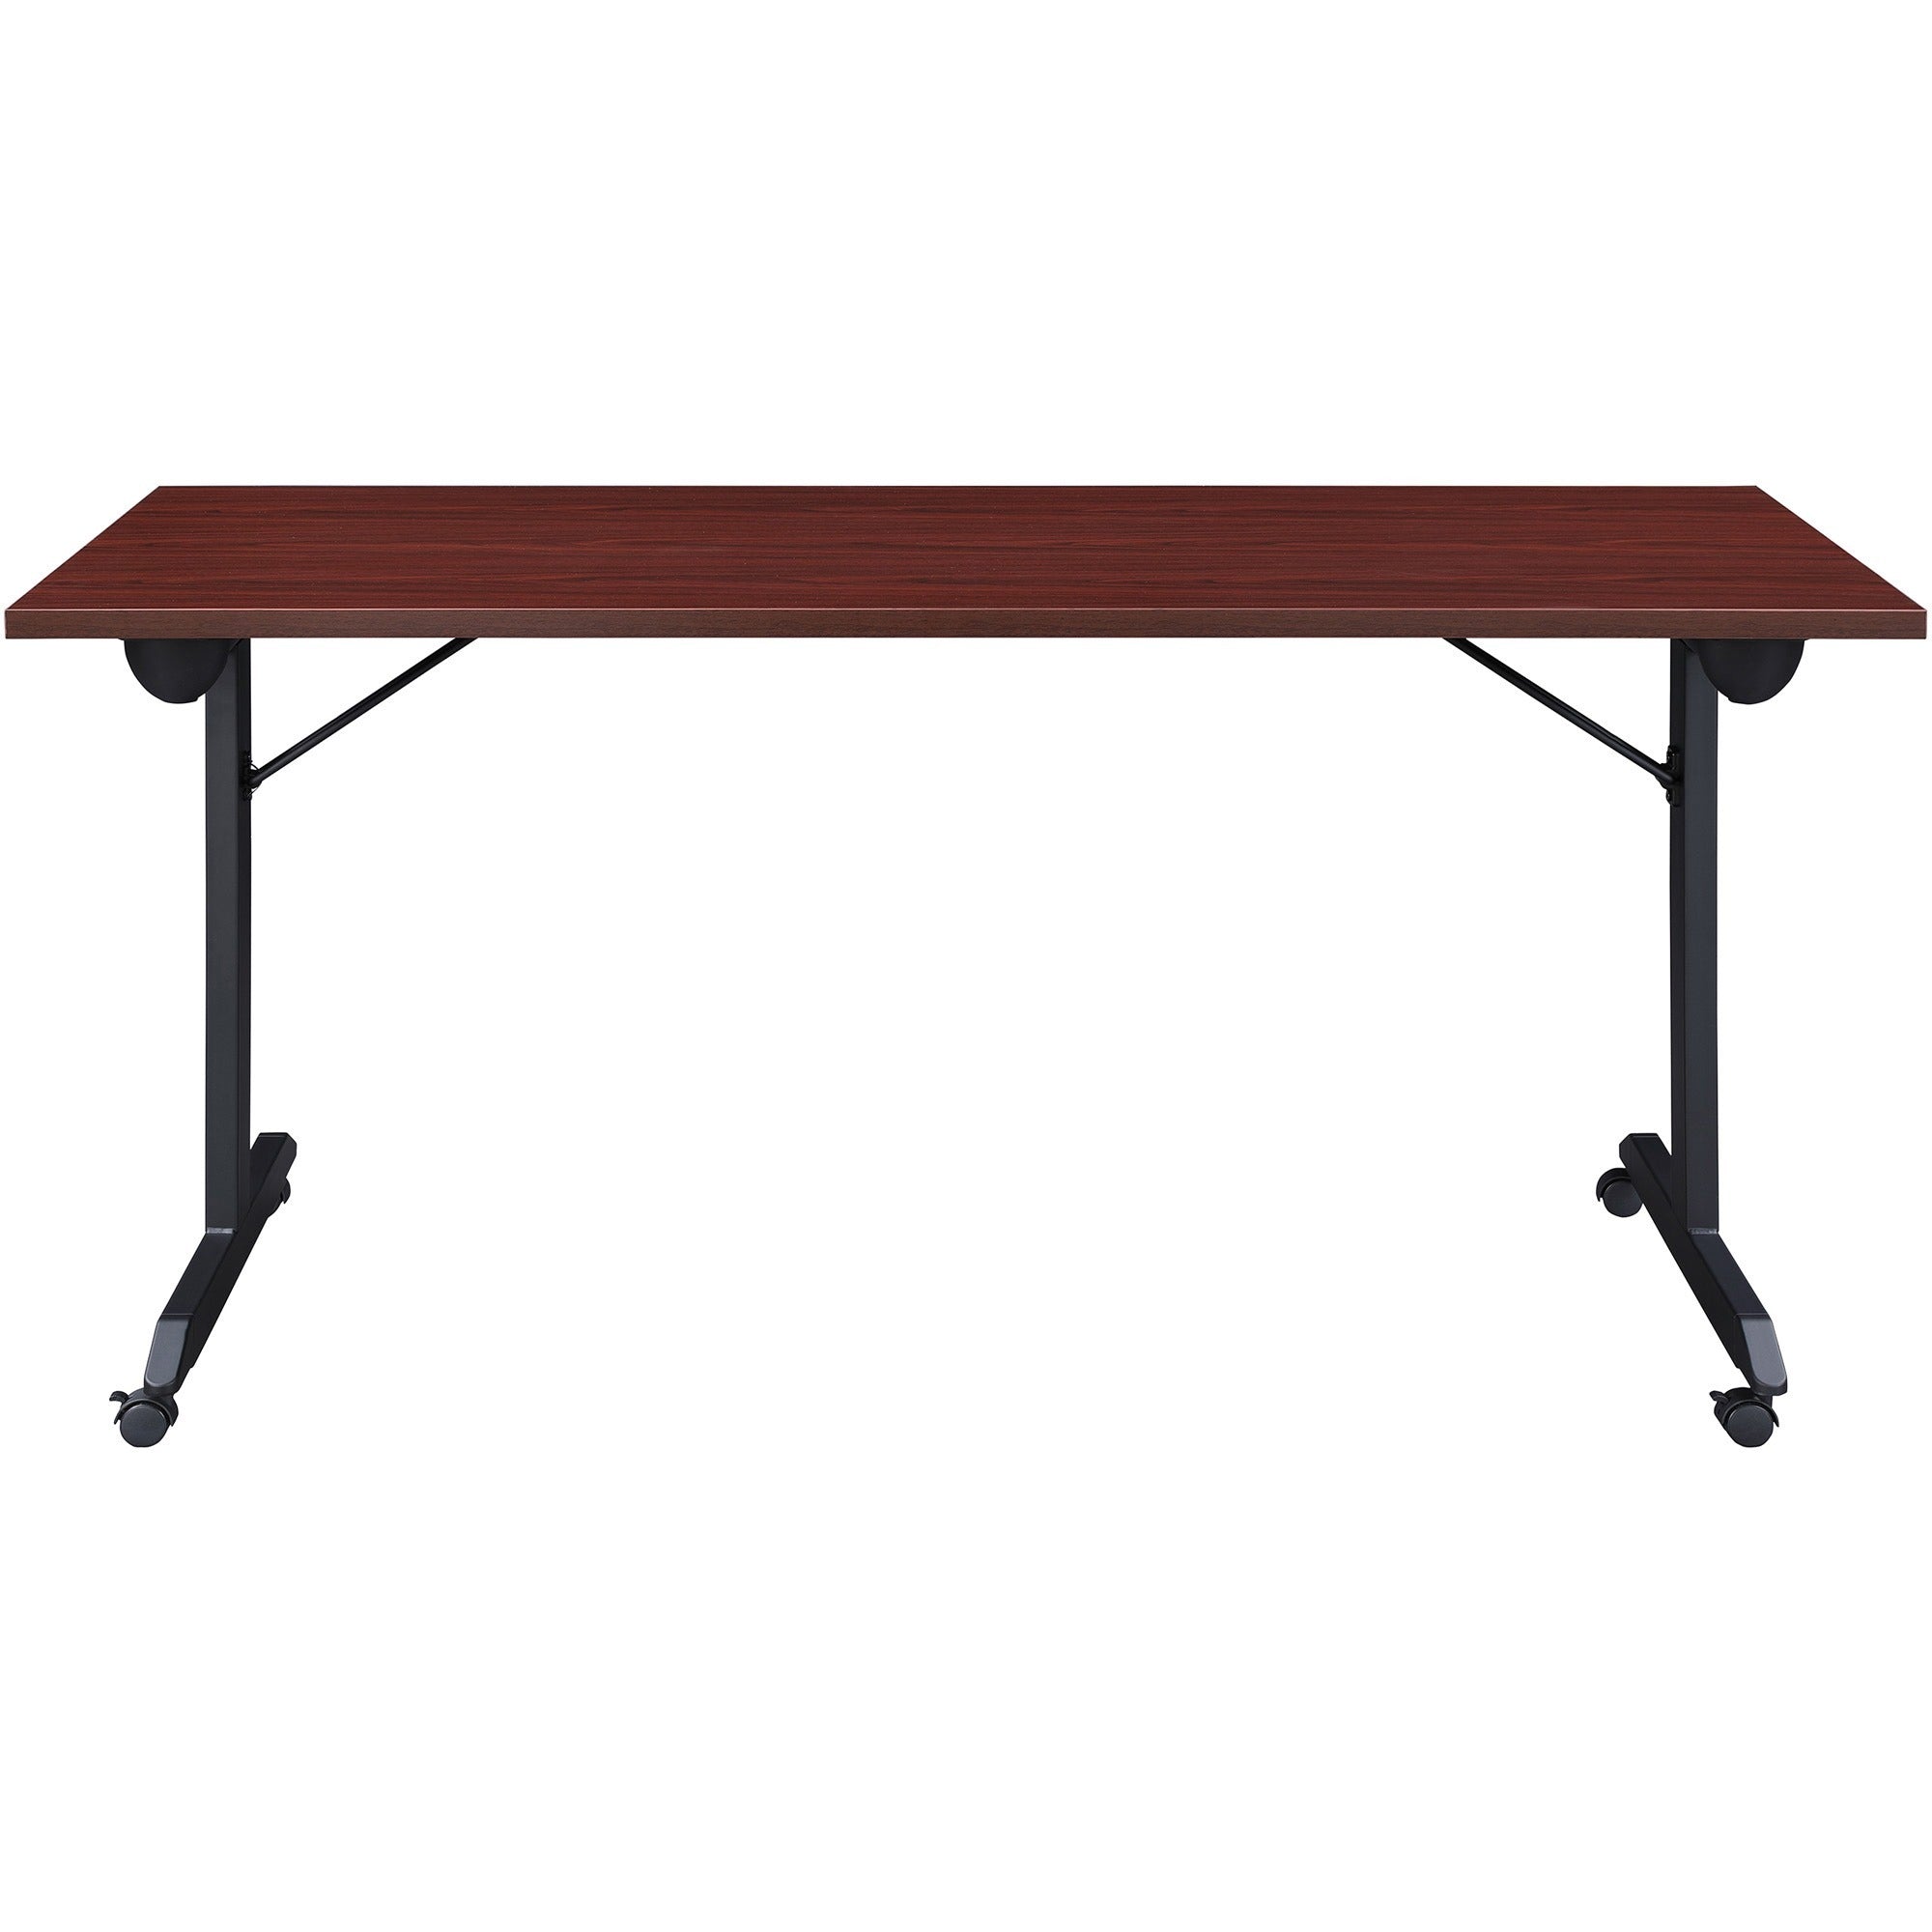 lorell-mobile-folding-training-table-for-table-toprectangle-top-powder-coated-base-200-lb-capacity-x-63-table-top-width-2950-height-x-63-width-x-24-depth-assembly-required-mahogany-1-each_llr60735 - 3